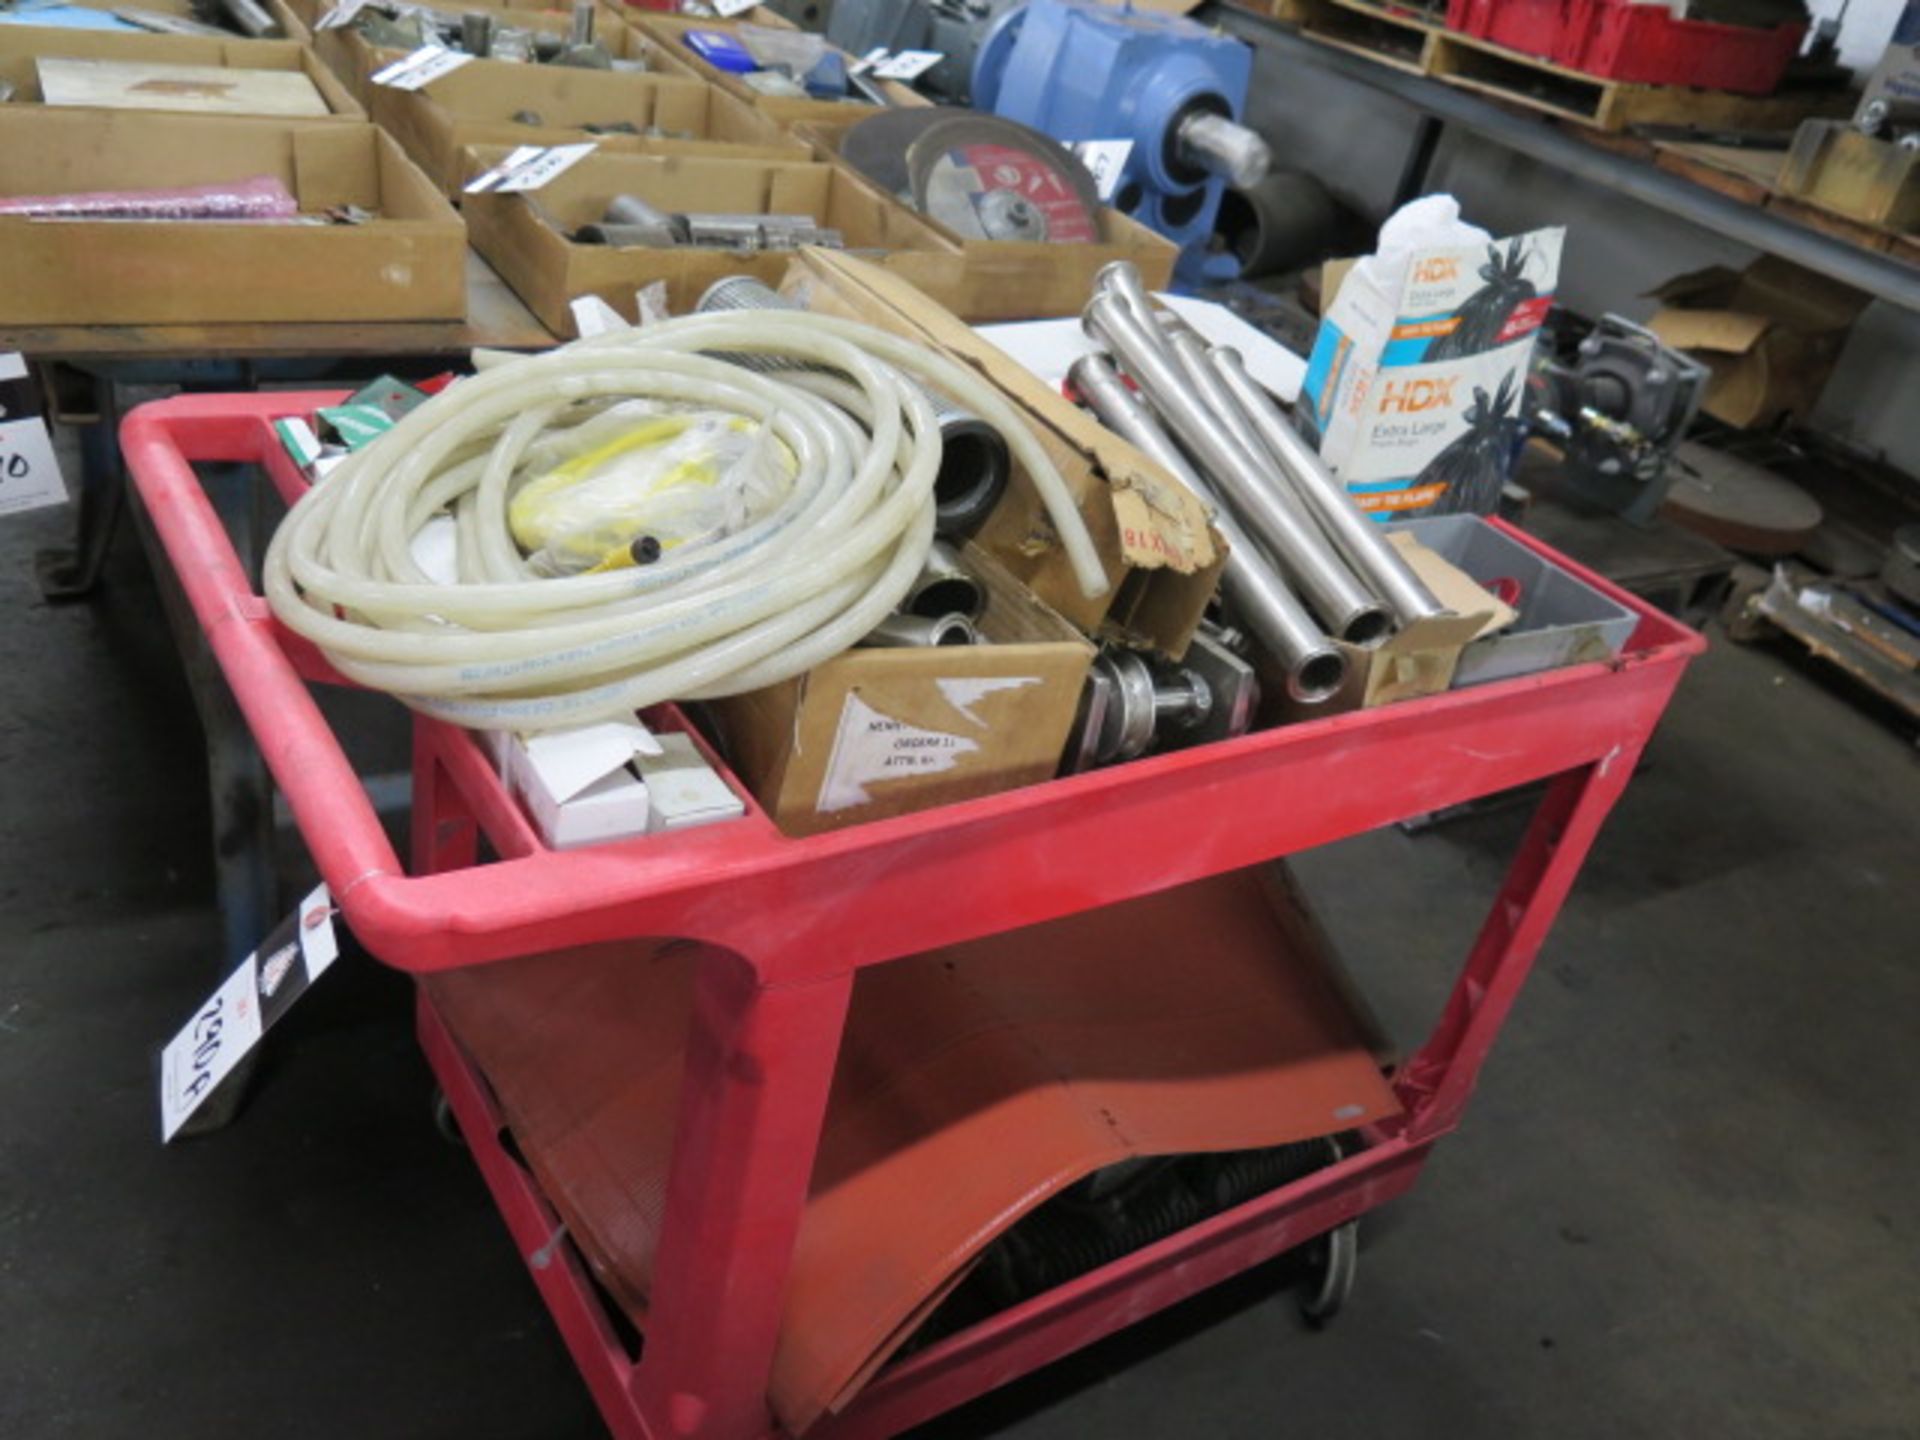 Stainless Steel Valves and Tubing, Band Heaters and Misc (SOLD AS-IS - NO WARRANTY)